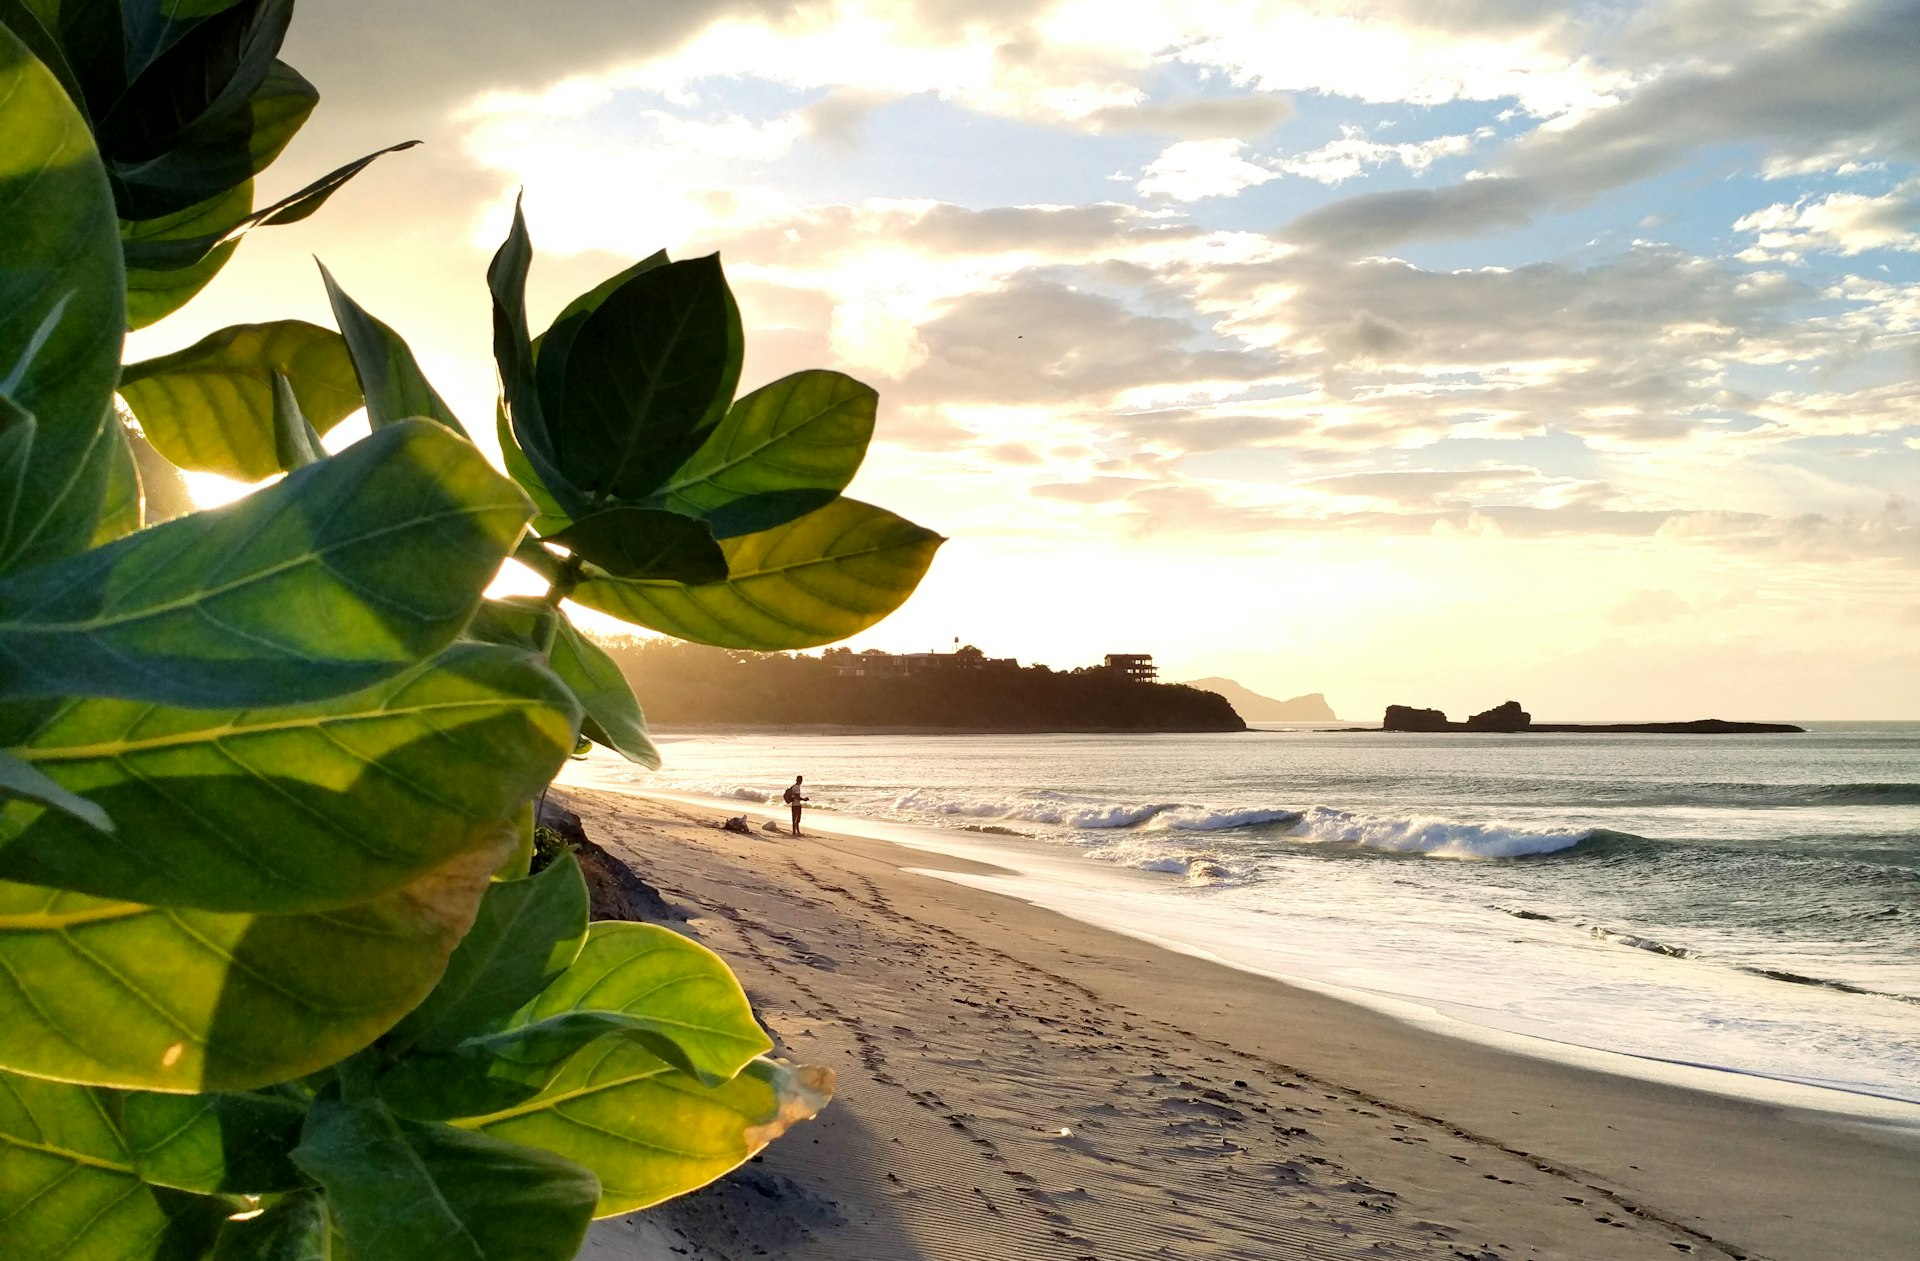 Green leaves catch the light of sunset, with surf-friendly waves seen in the distance, at Popoyo Beach, Nicaragua